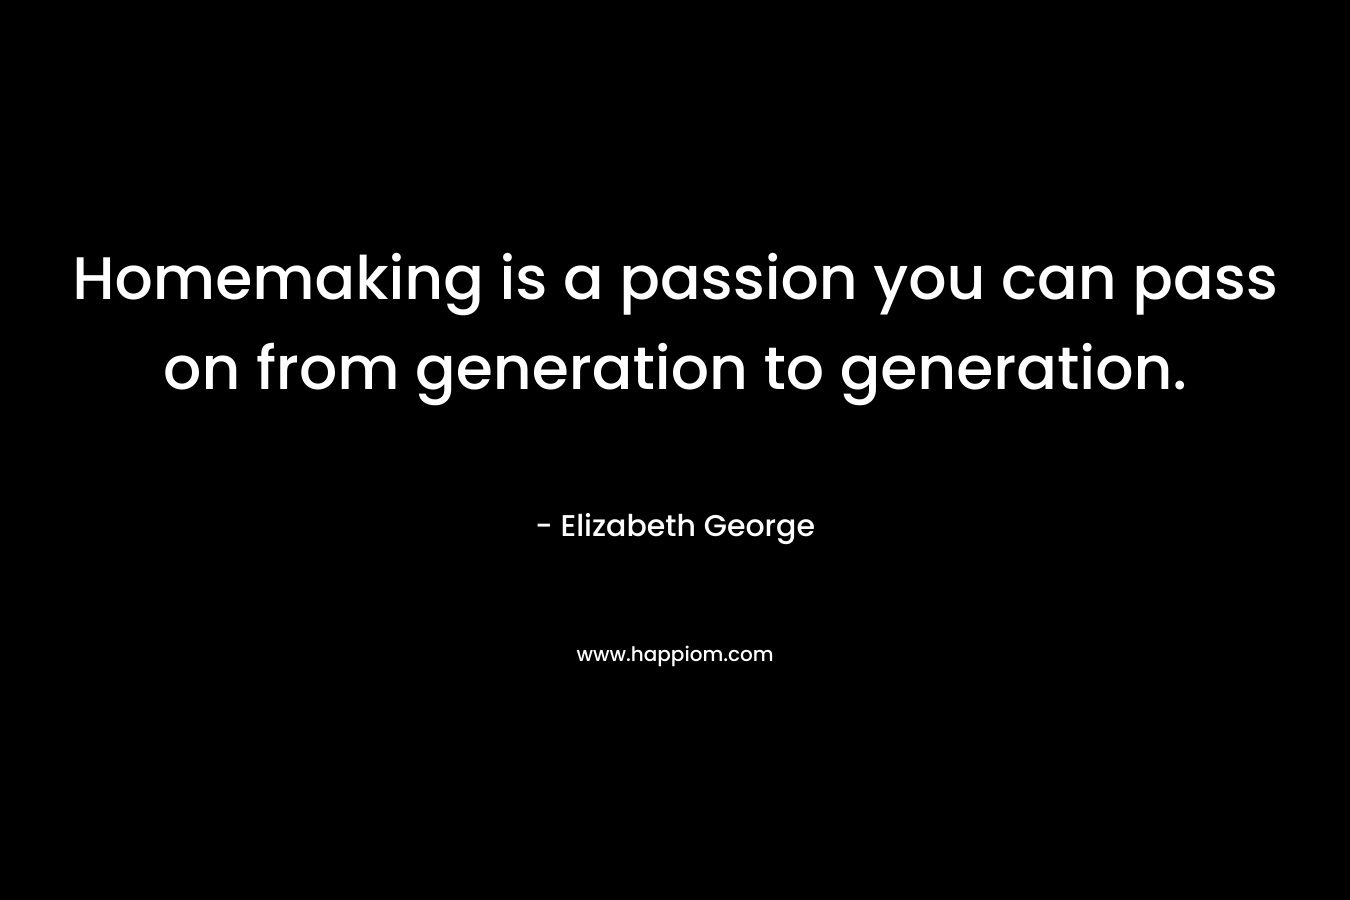 Homemaking is a passion you can pass on from generation to generation.